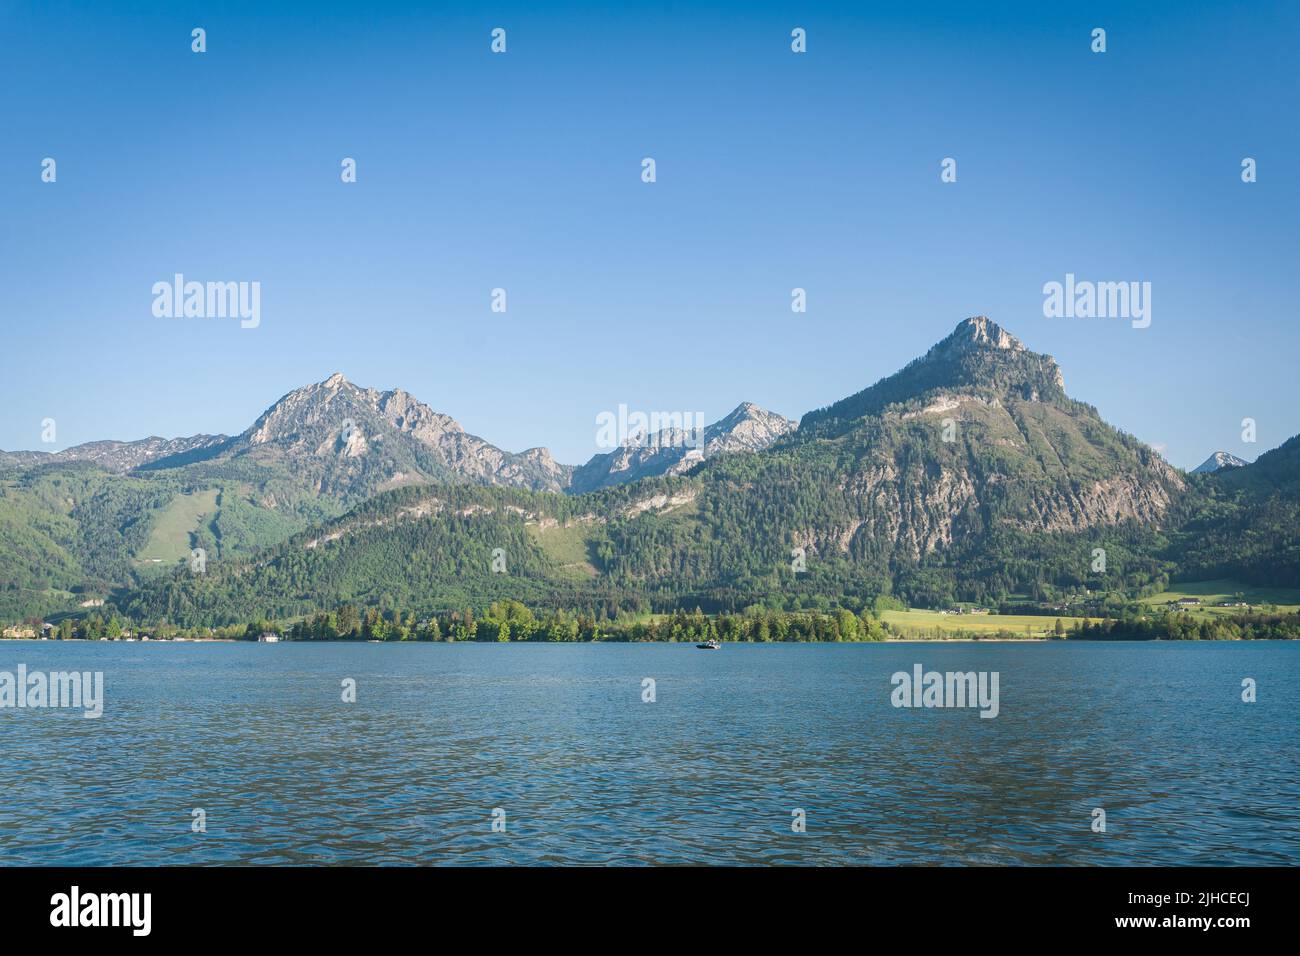 Sparber, Rinnkogel and Bergwerkskogl mountains at the Lake Wolfgangsee in Salzkammergut during summer. Stock Photo